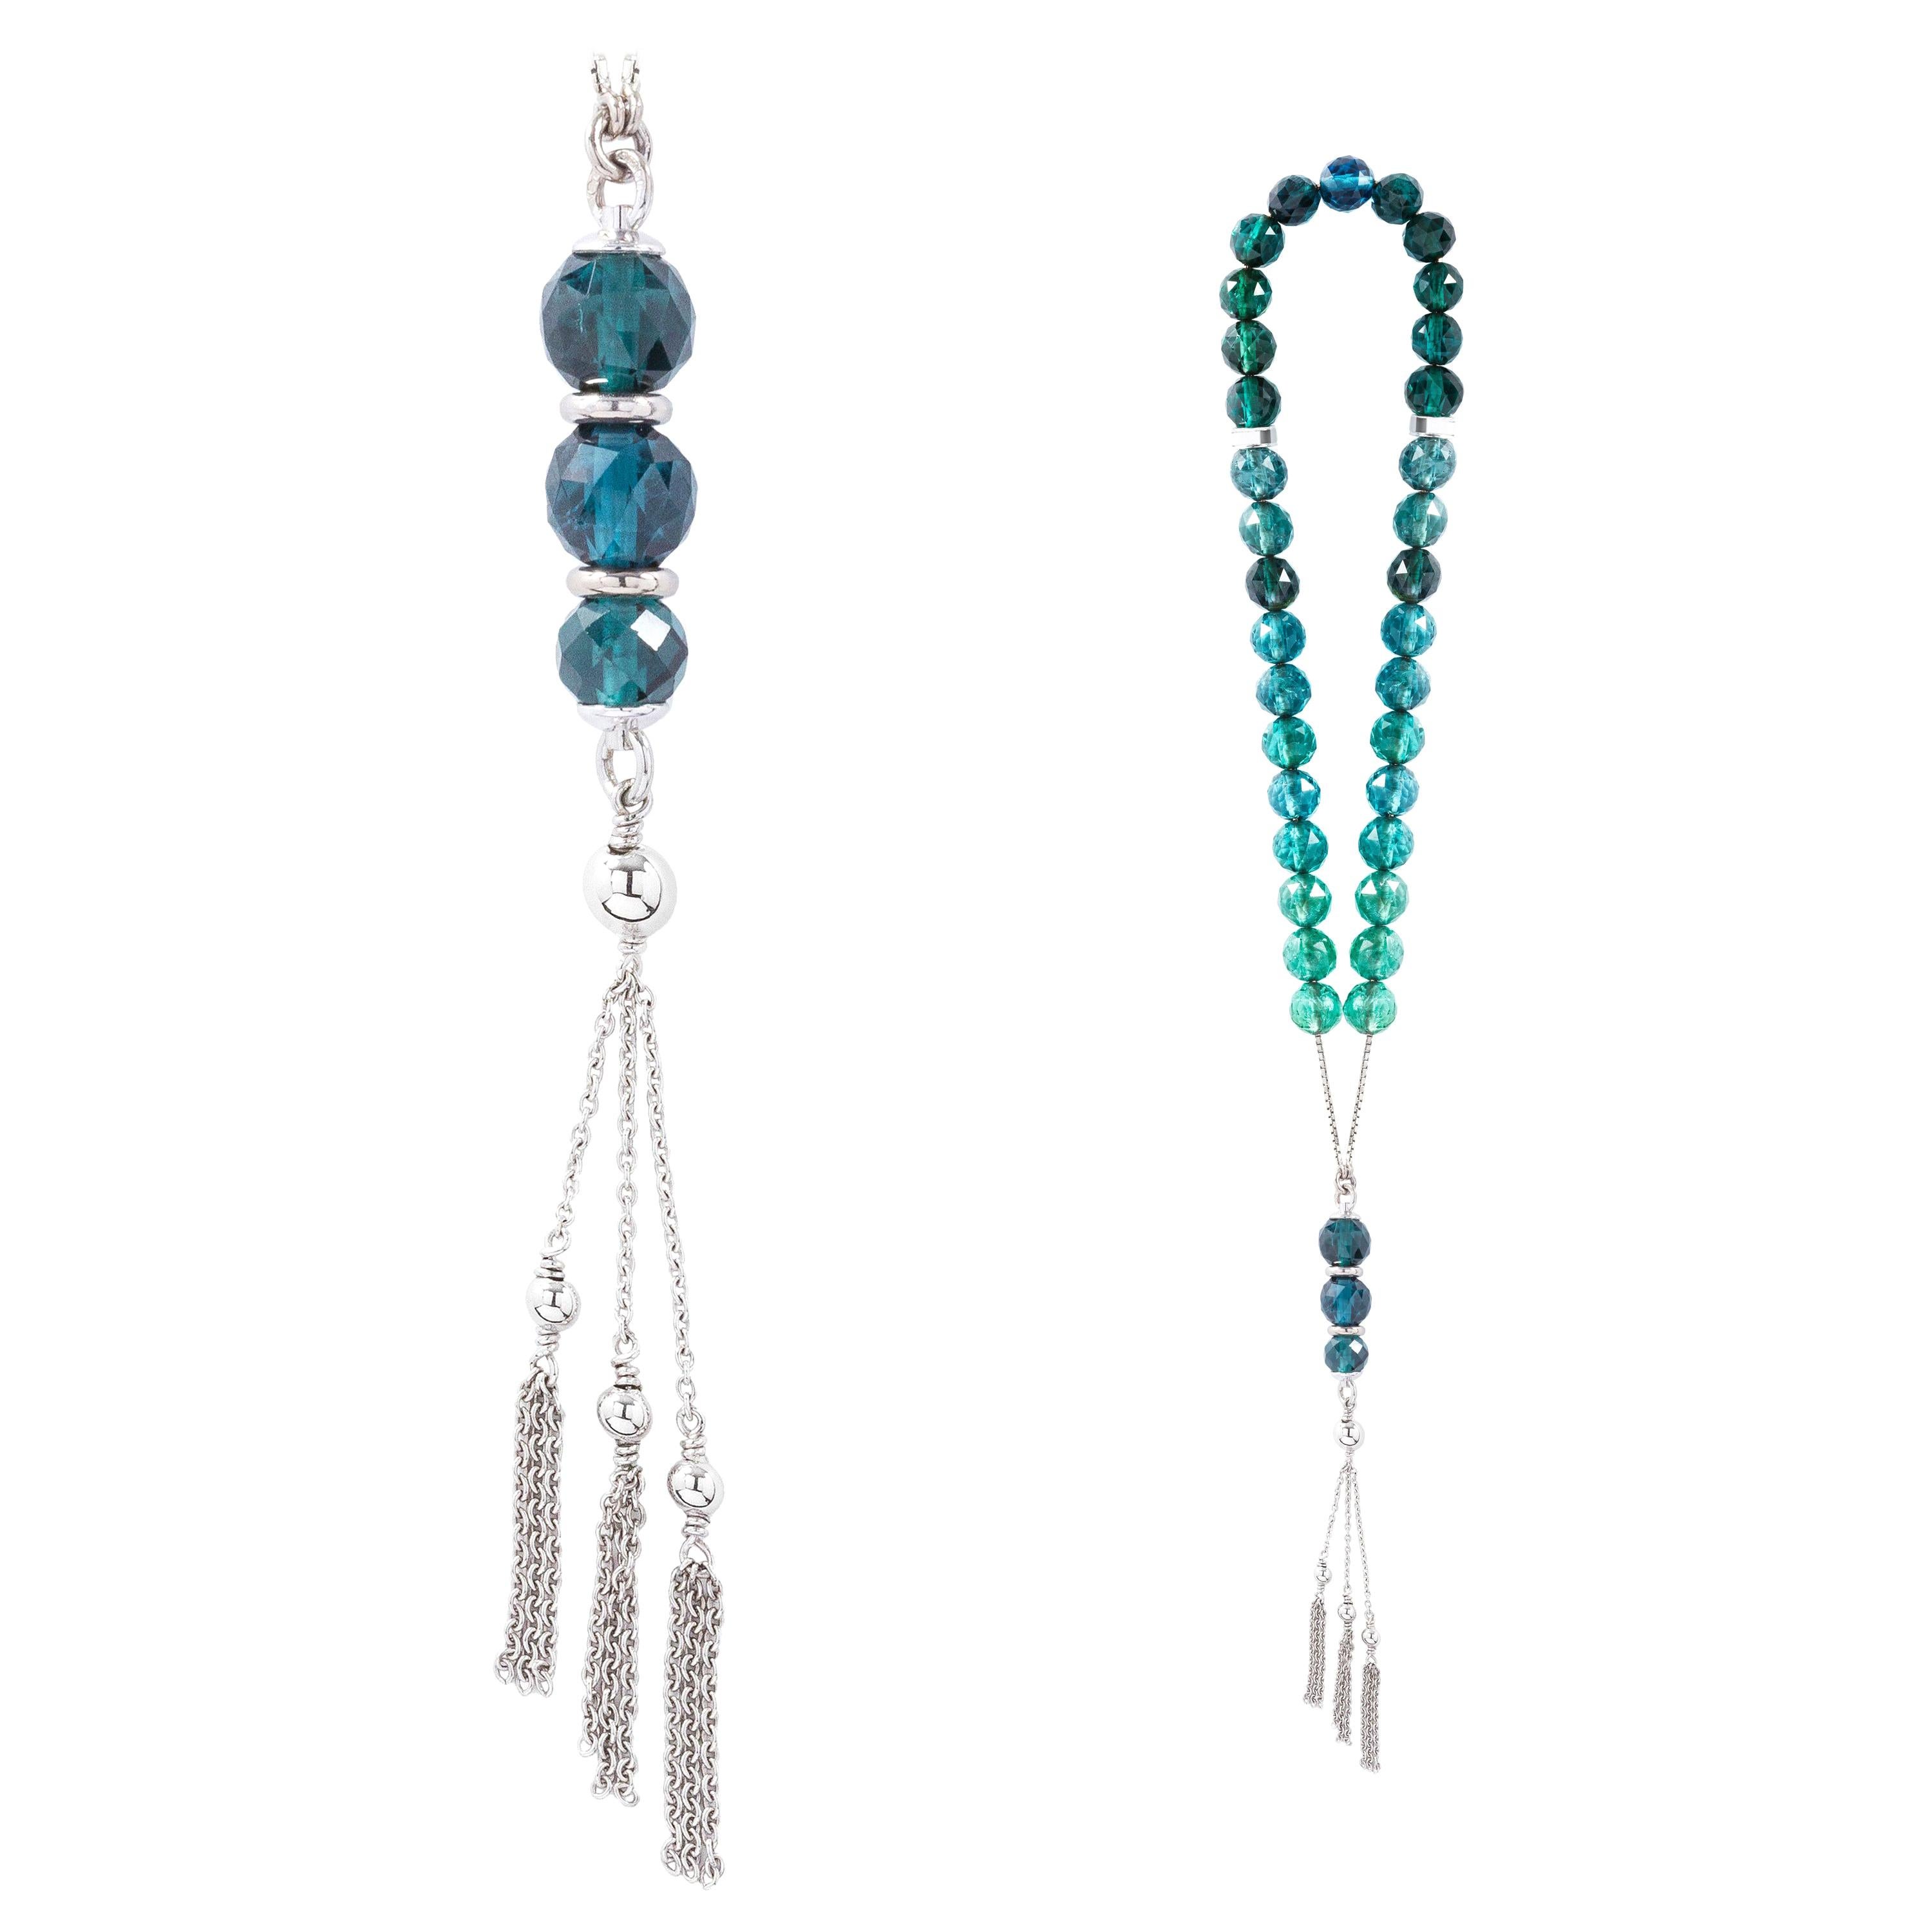 Misbaha 18 Karat White Gold and 33 Blue Green Tourmaline Facetted Beads